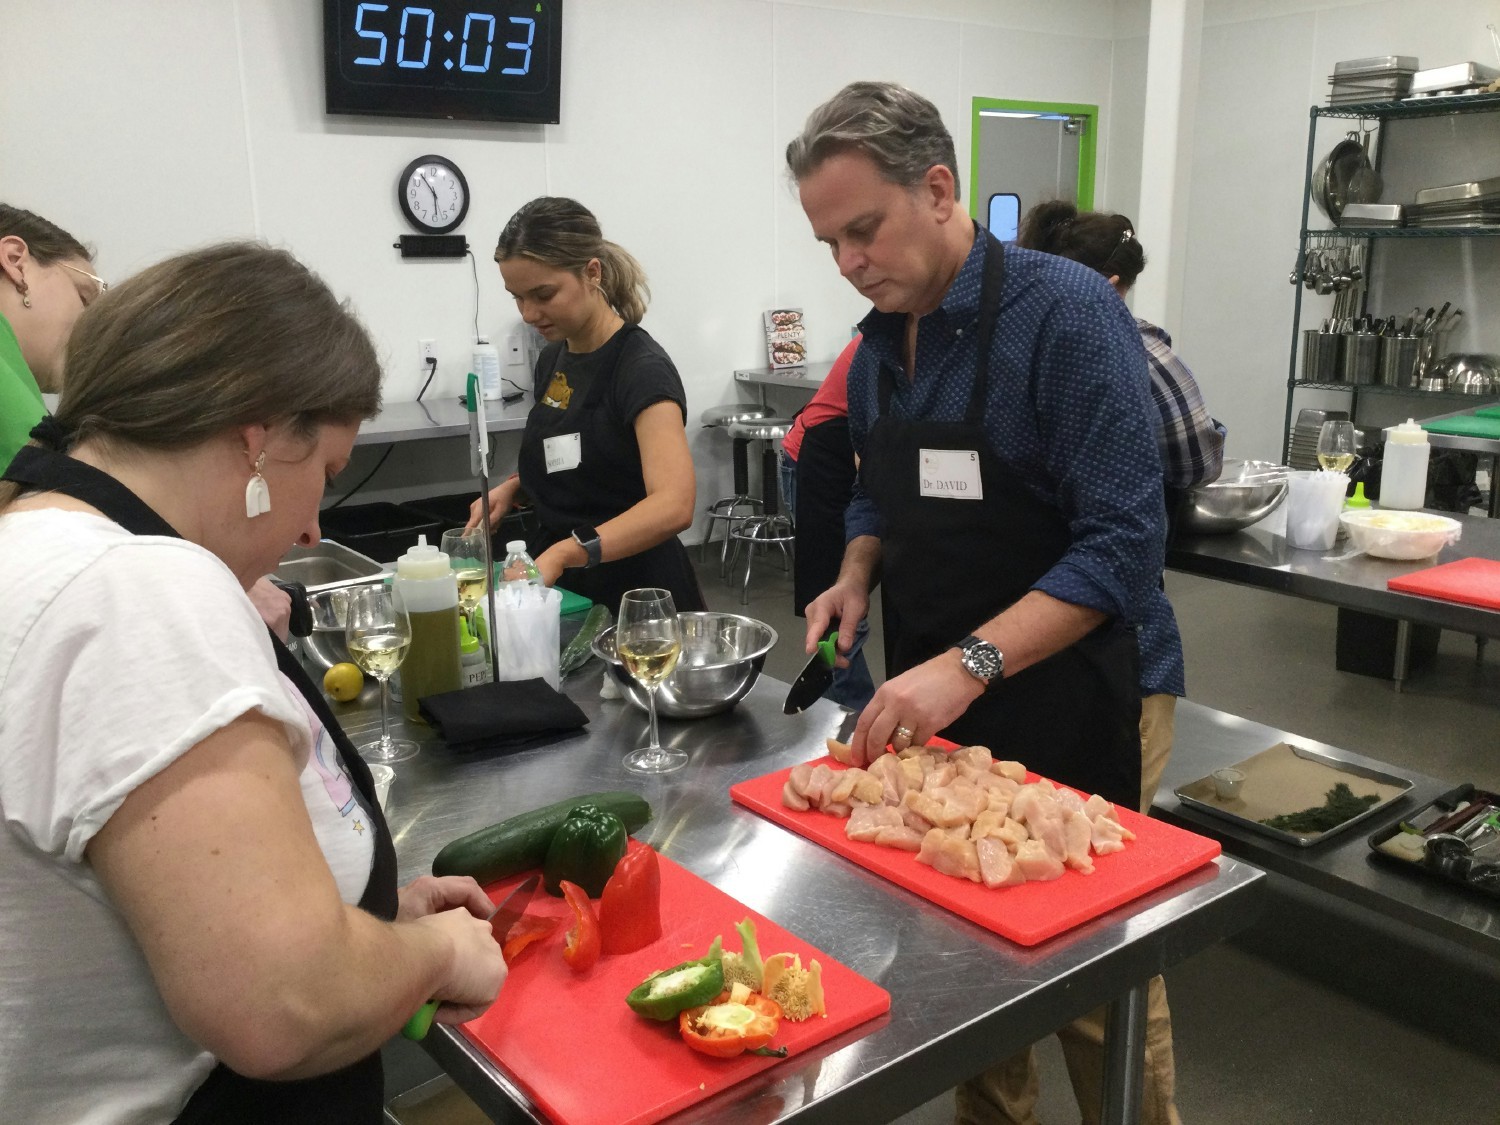 Cooking to beat the clock! Team members working together in a real-life Iron Chef competition.